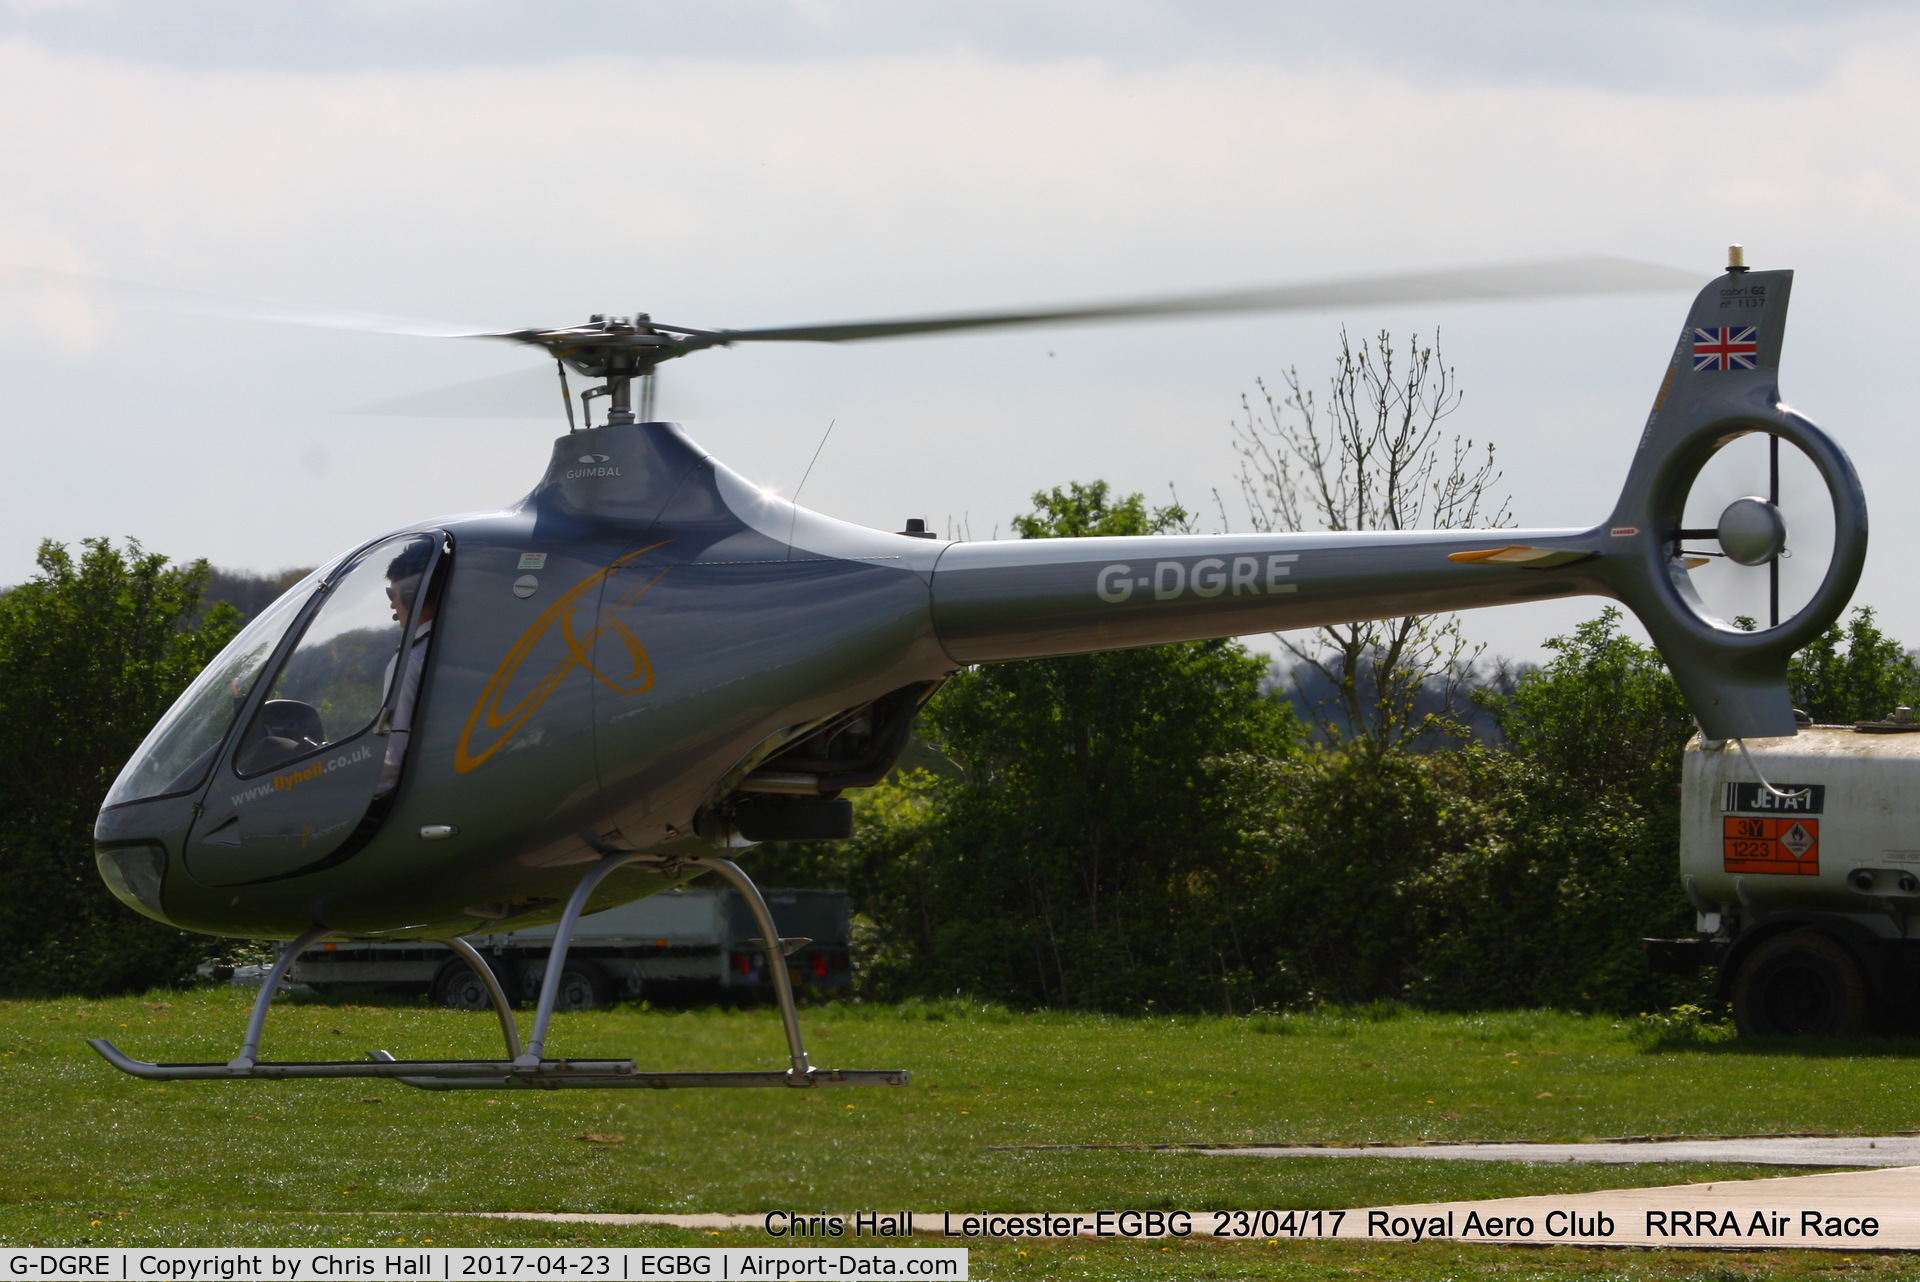 G-DGRE, 2016 Guimbal Cabri G2 C/N 1137, at Leicester